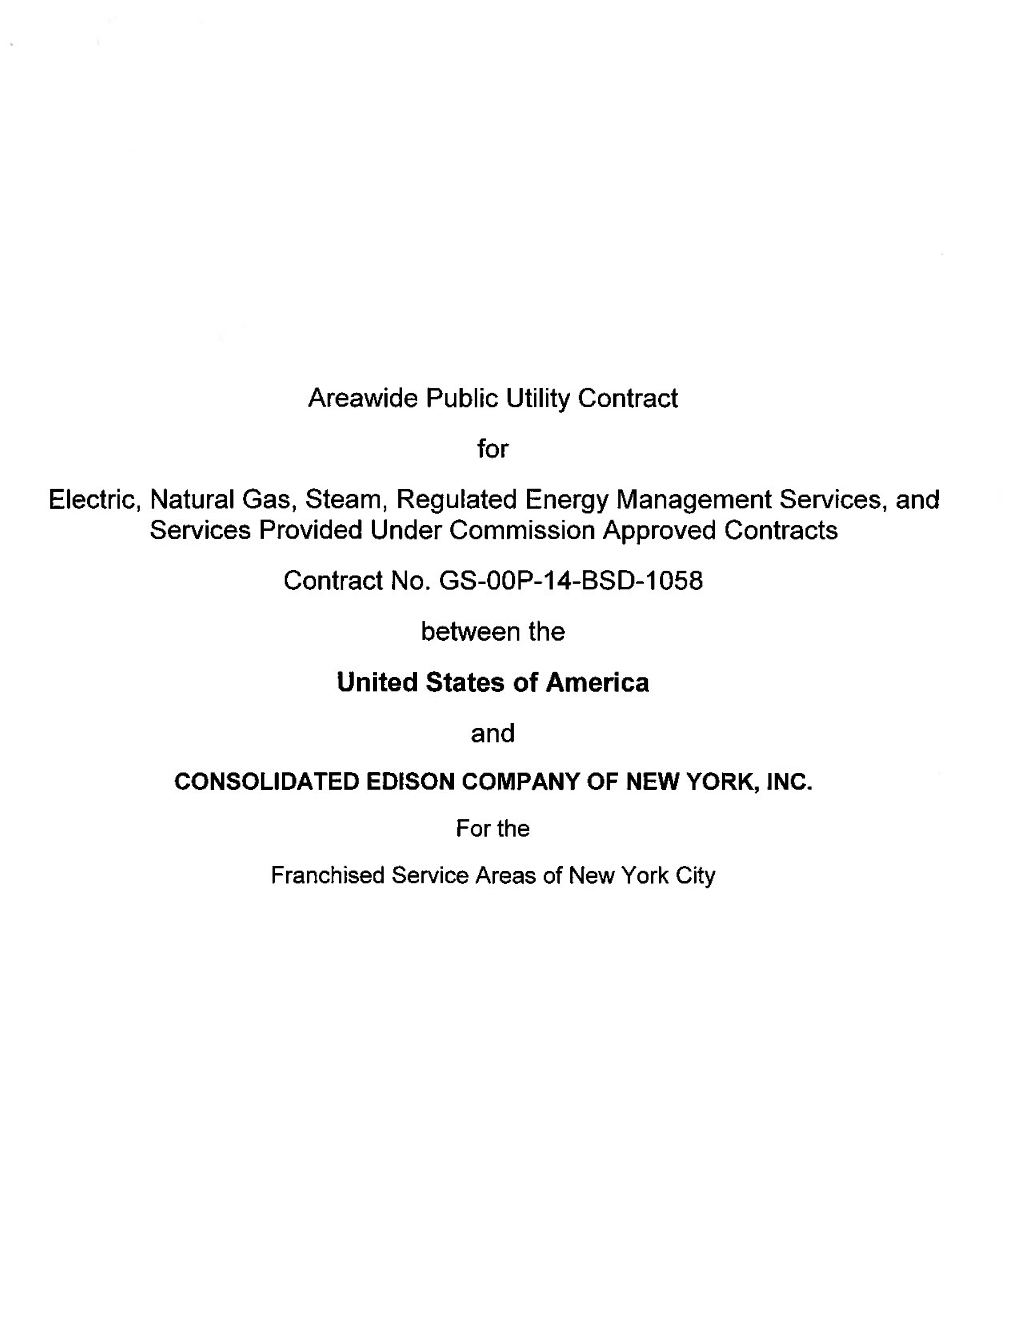 GSA Areawide Contract with Consolidated Edison Company of New York, Inc